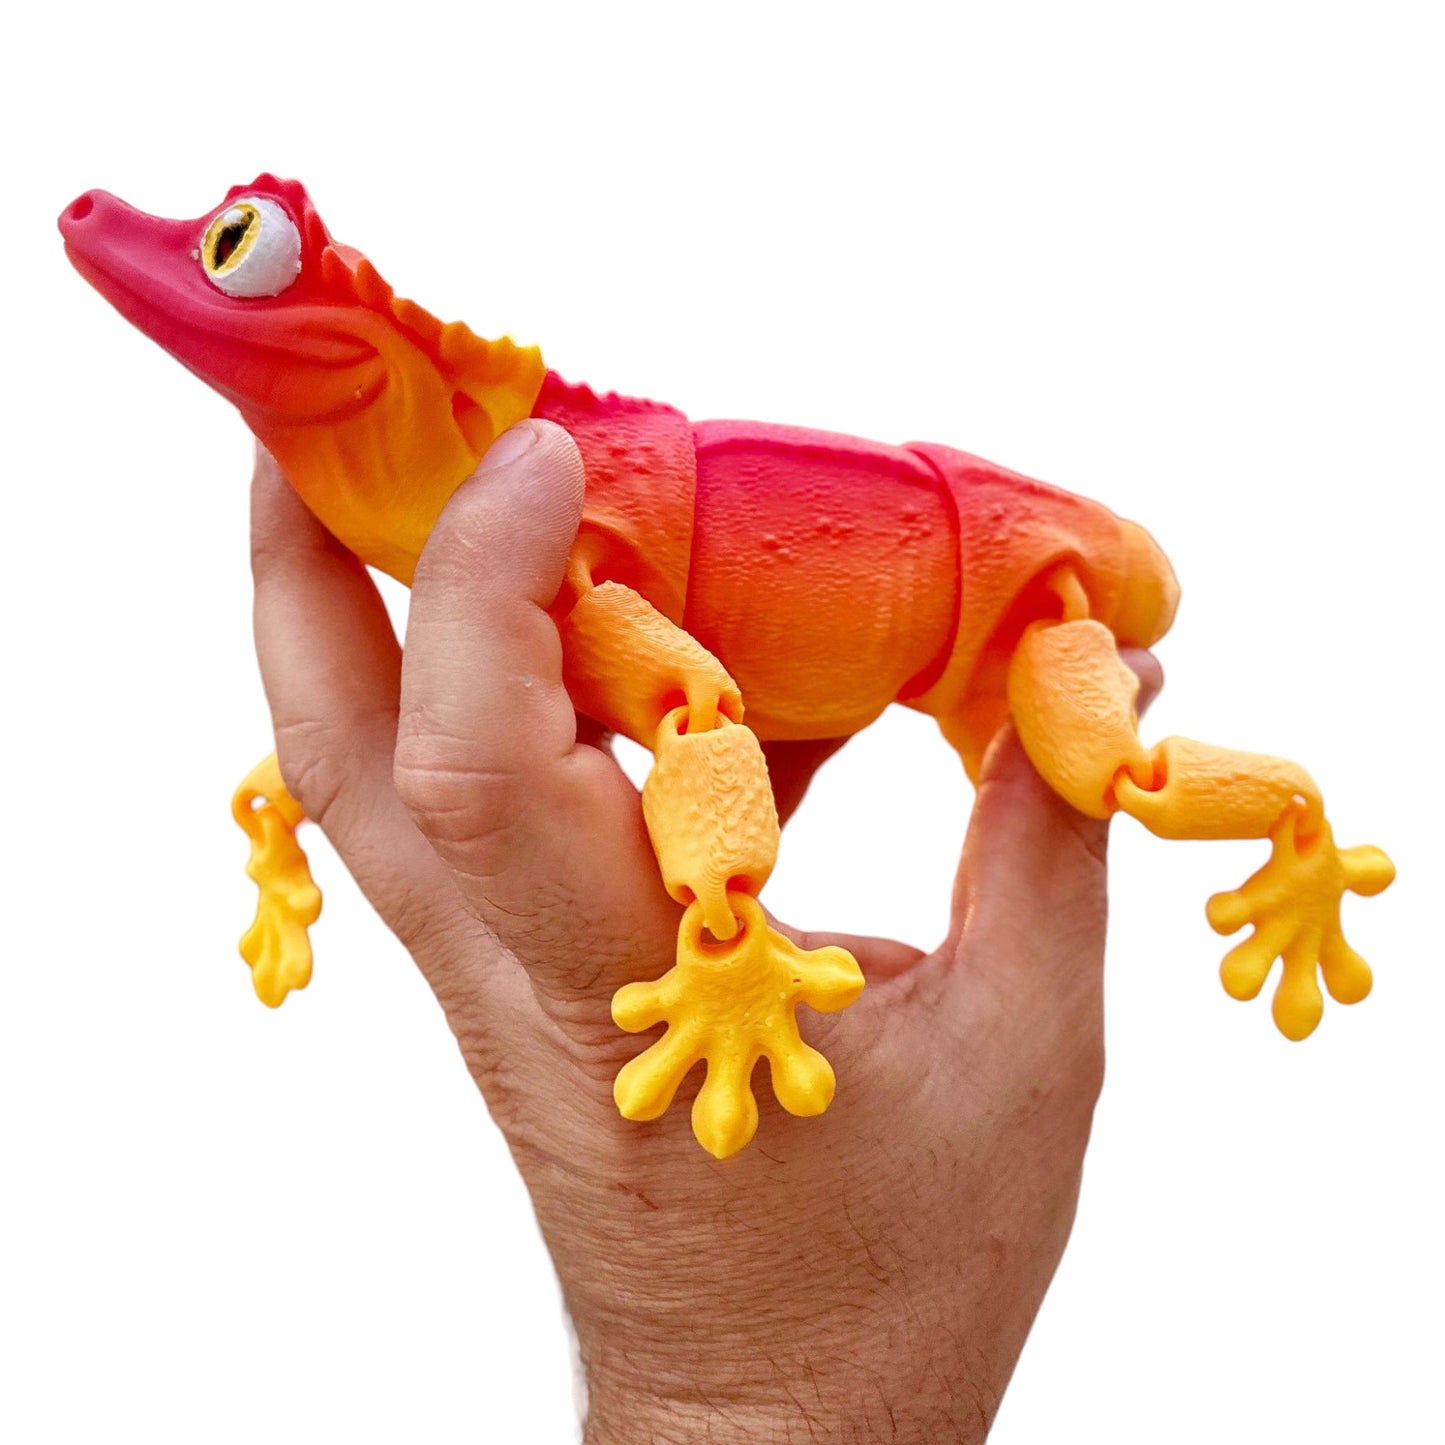 3D Printed Crested Gecko